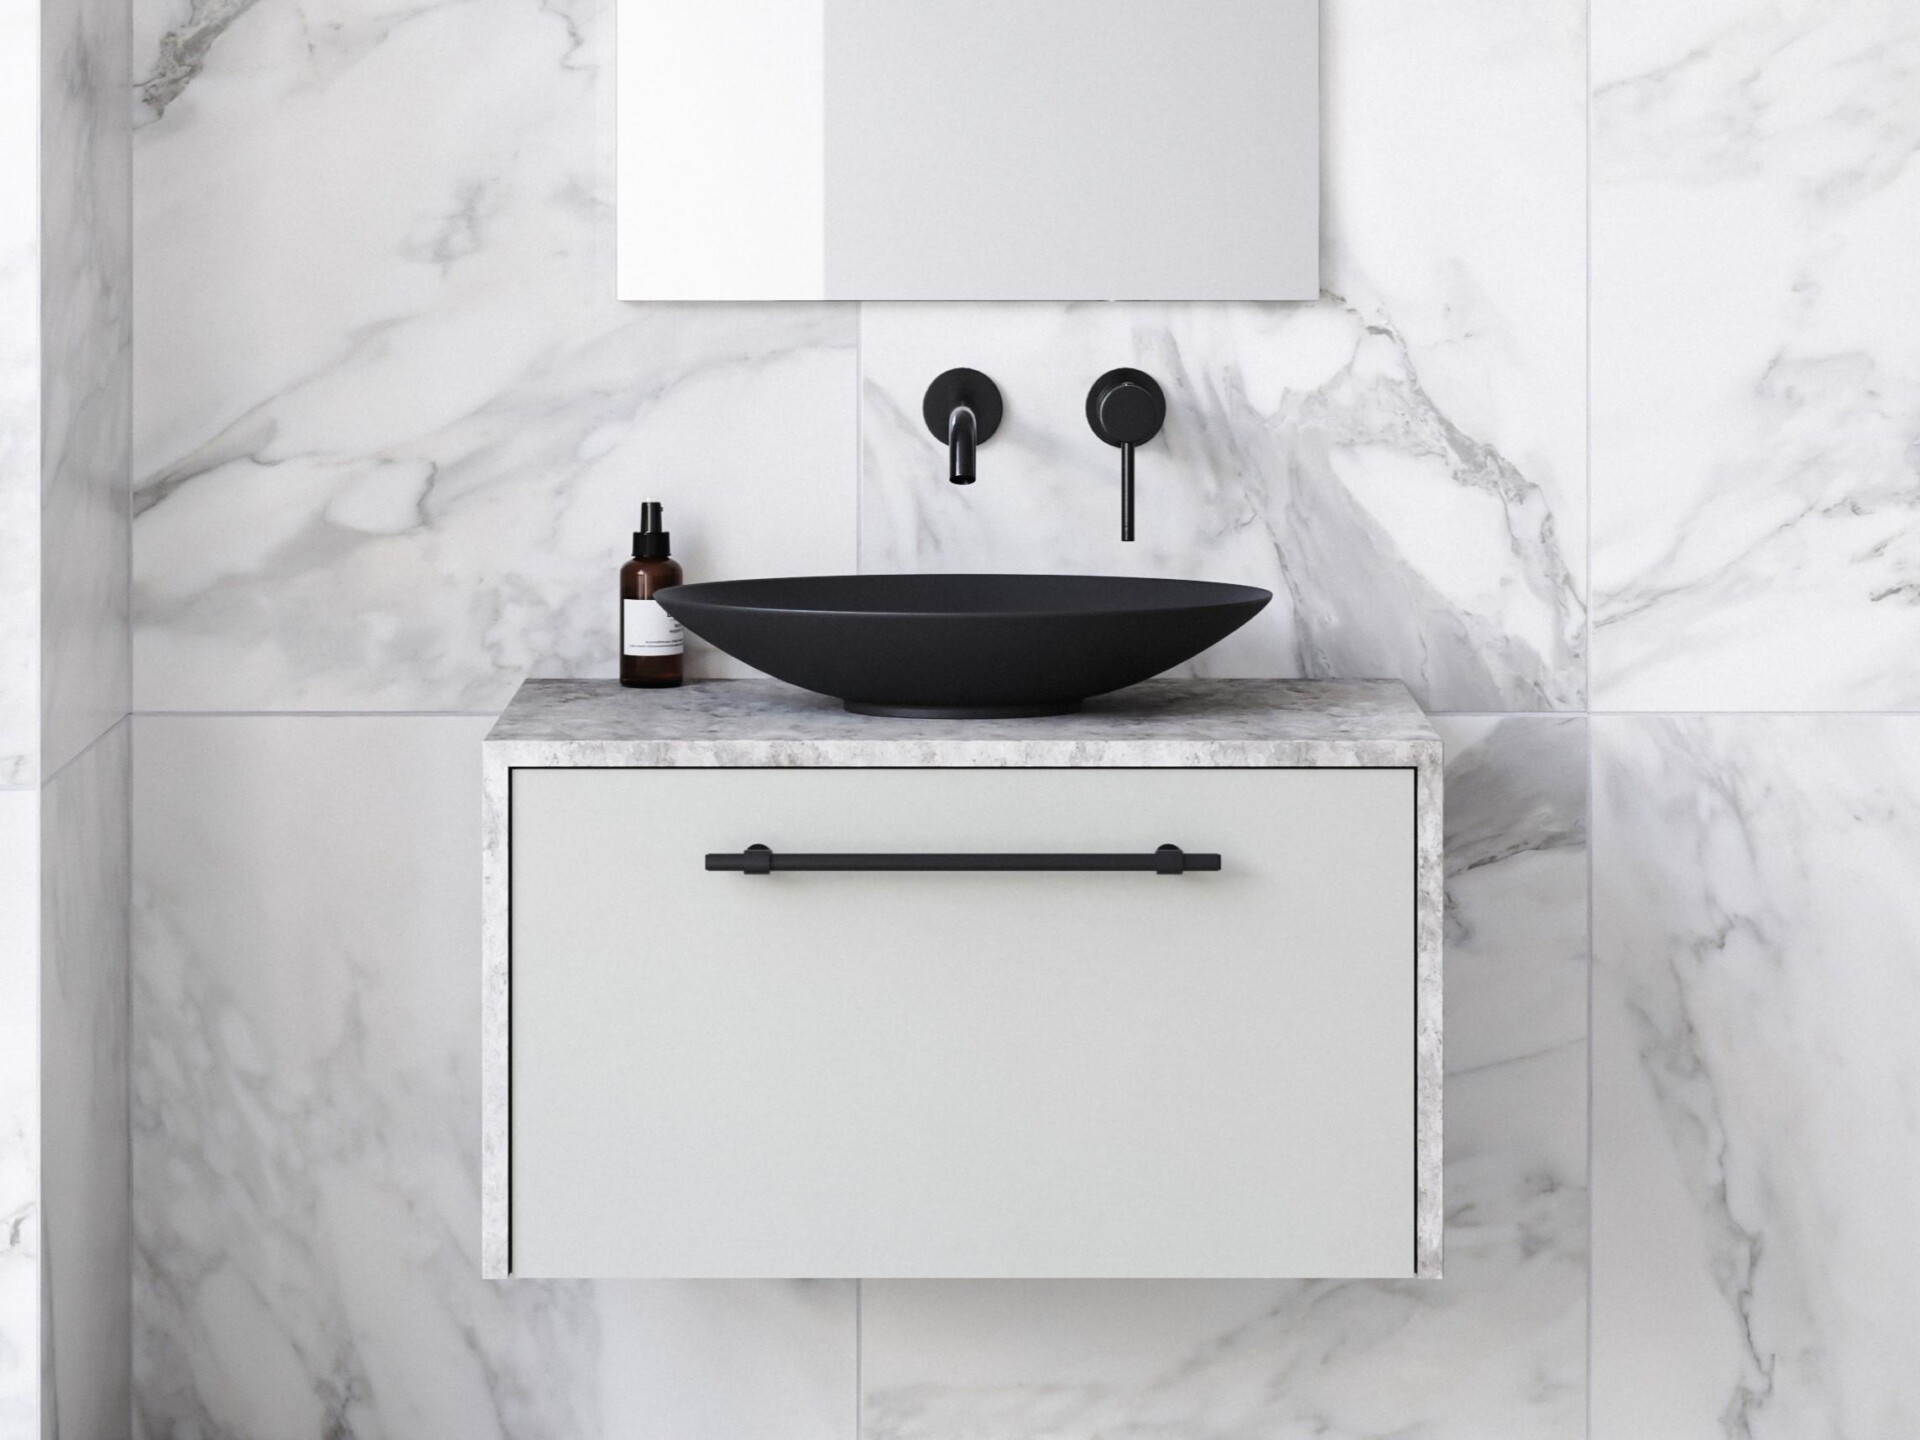 Ainsworth Vanity 750mm | AIN-V-750-C-SSA-W | Light Grey Satin Cabinet with Grigio Stone SilkSurface Top and Black Matt Feather Ceramic Basin | Shown with Basin Colour Upgrade | UPG-OPT-BASCOLOUR | ADD $144